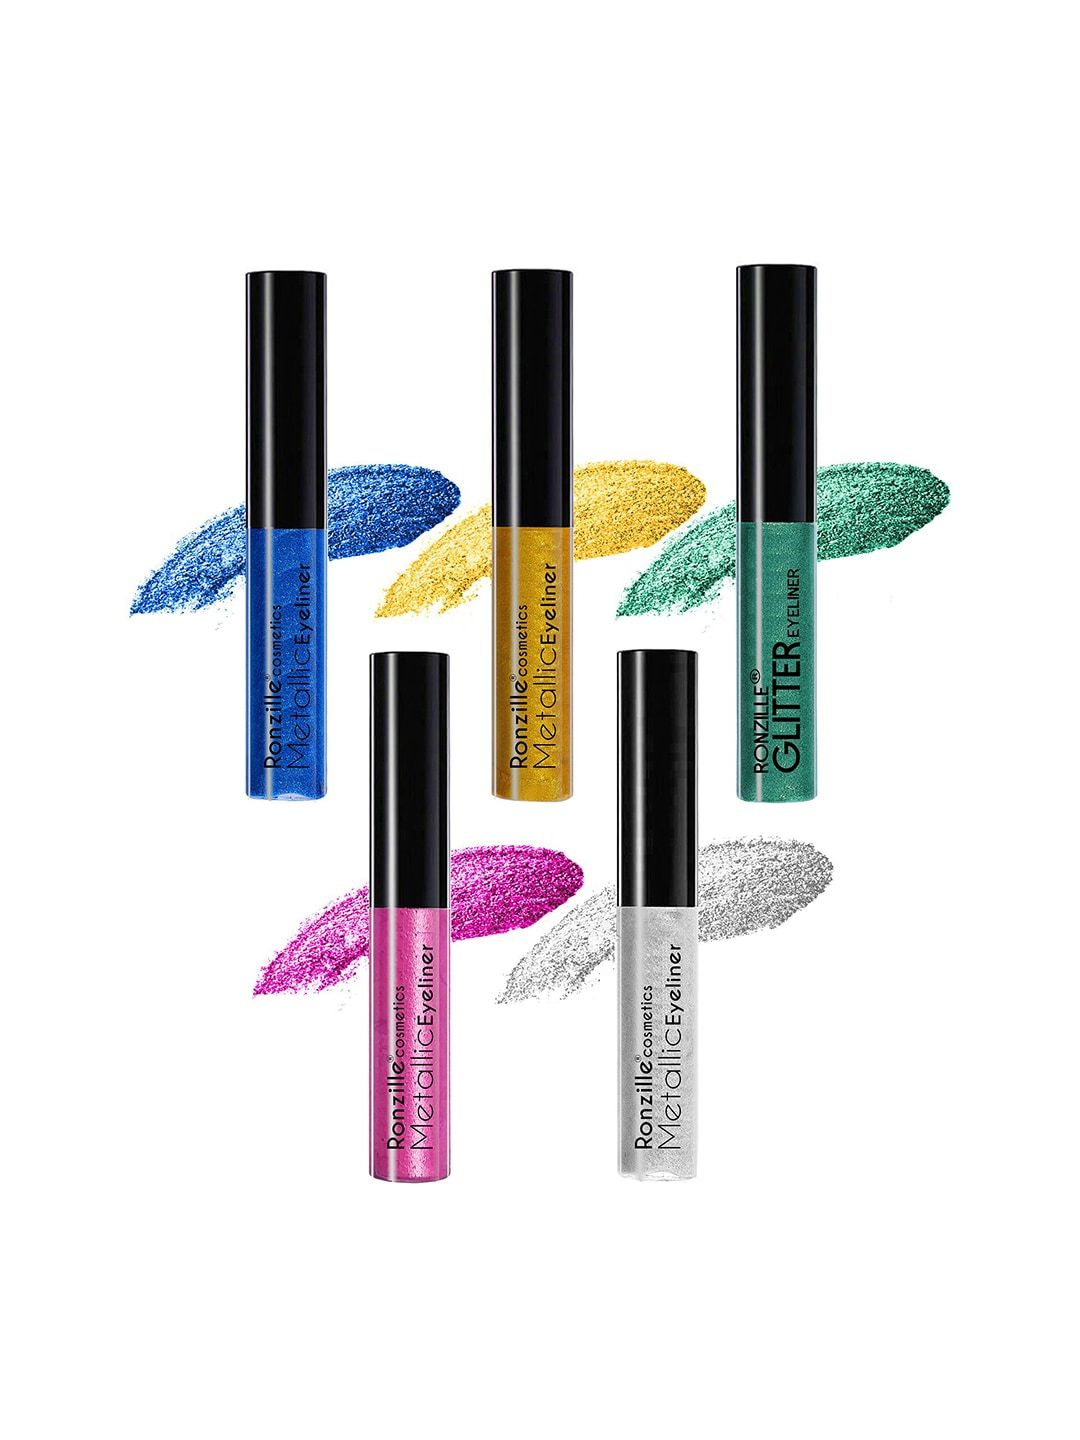 Ronzille Pack Of 5 Glitter Eyeliners Price in India